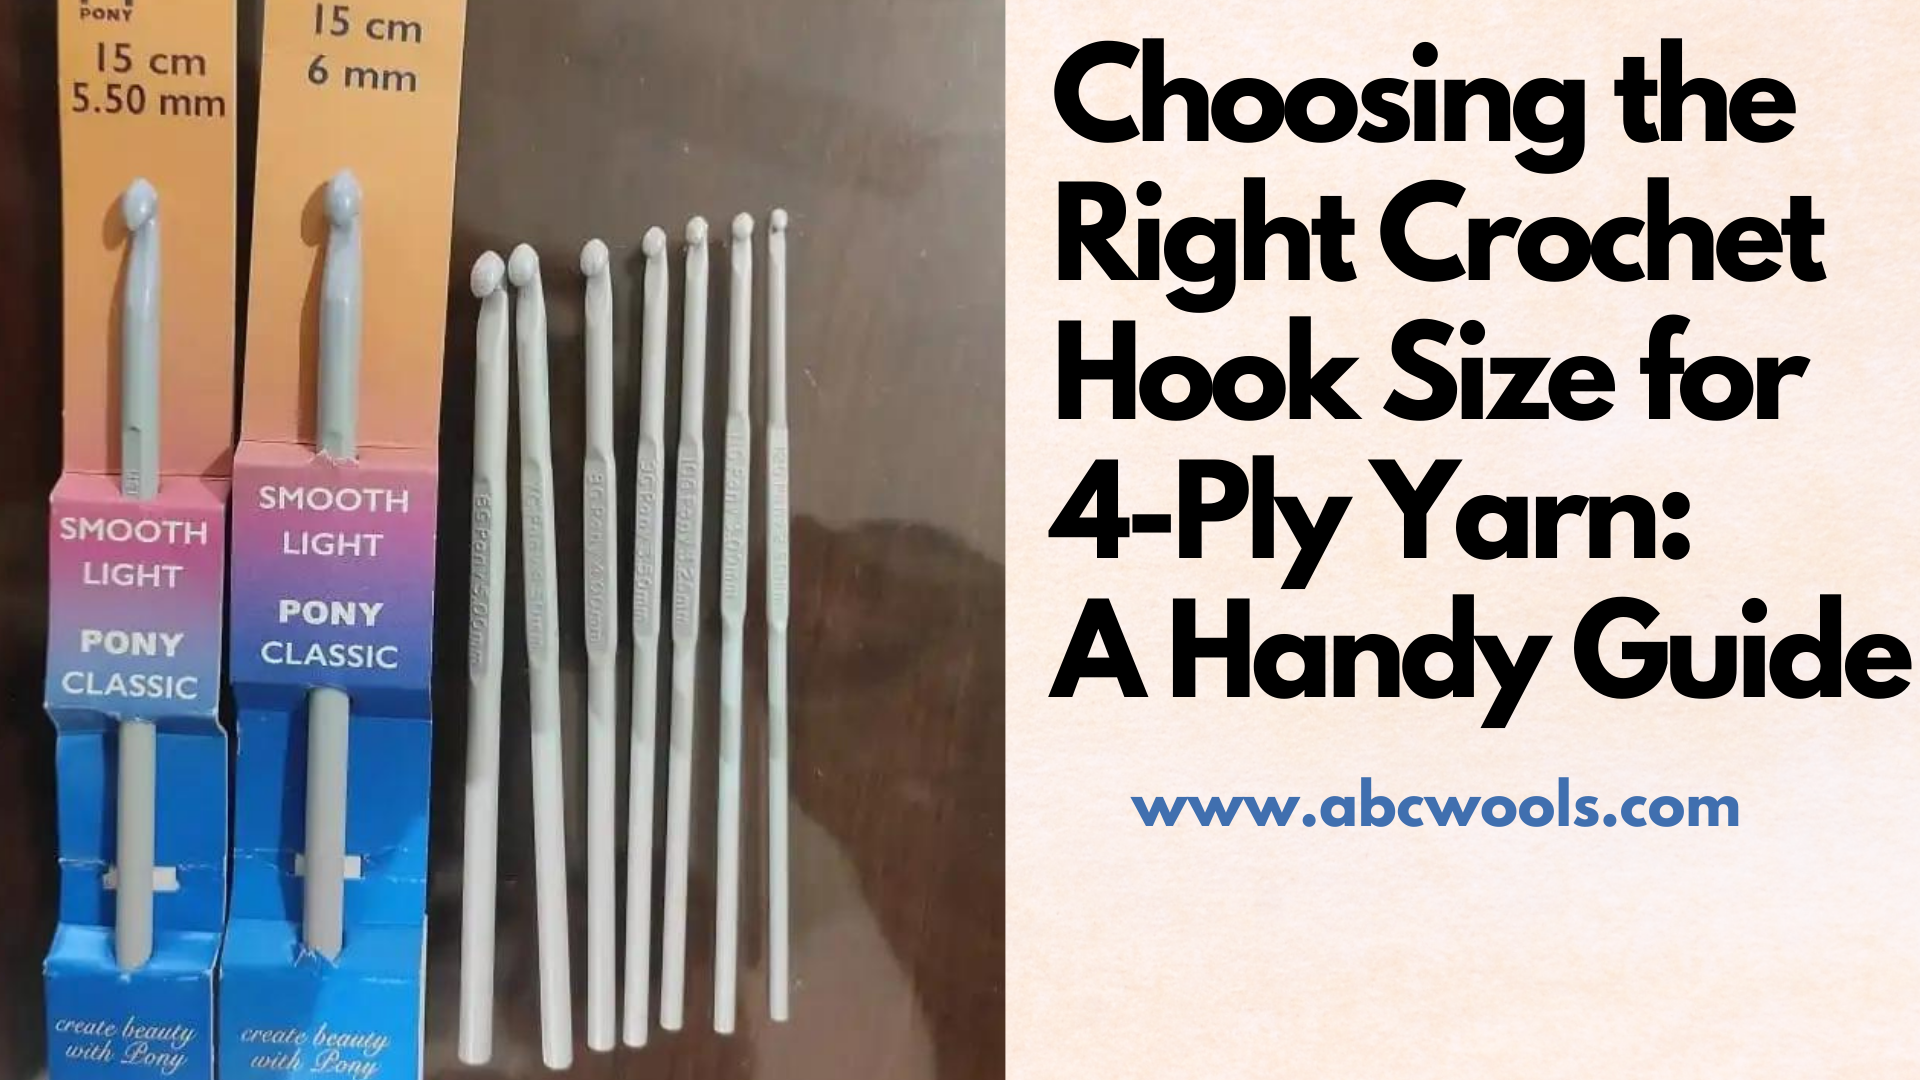 Choosing the Right Crochet Hook Size for 4-Ply Yarn: A Handy Guide